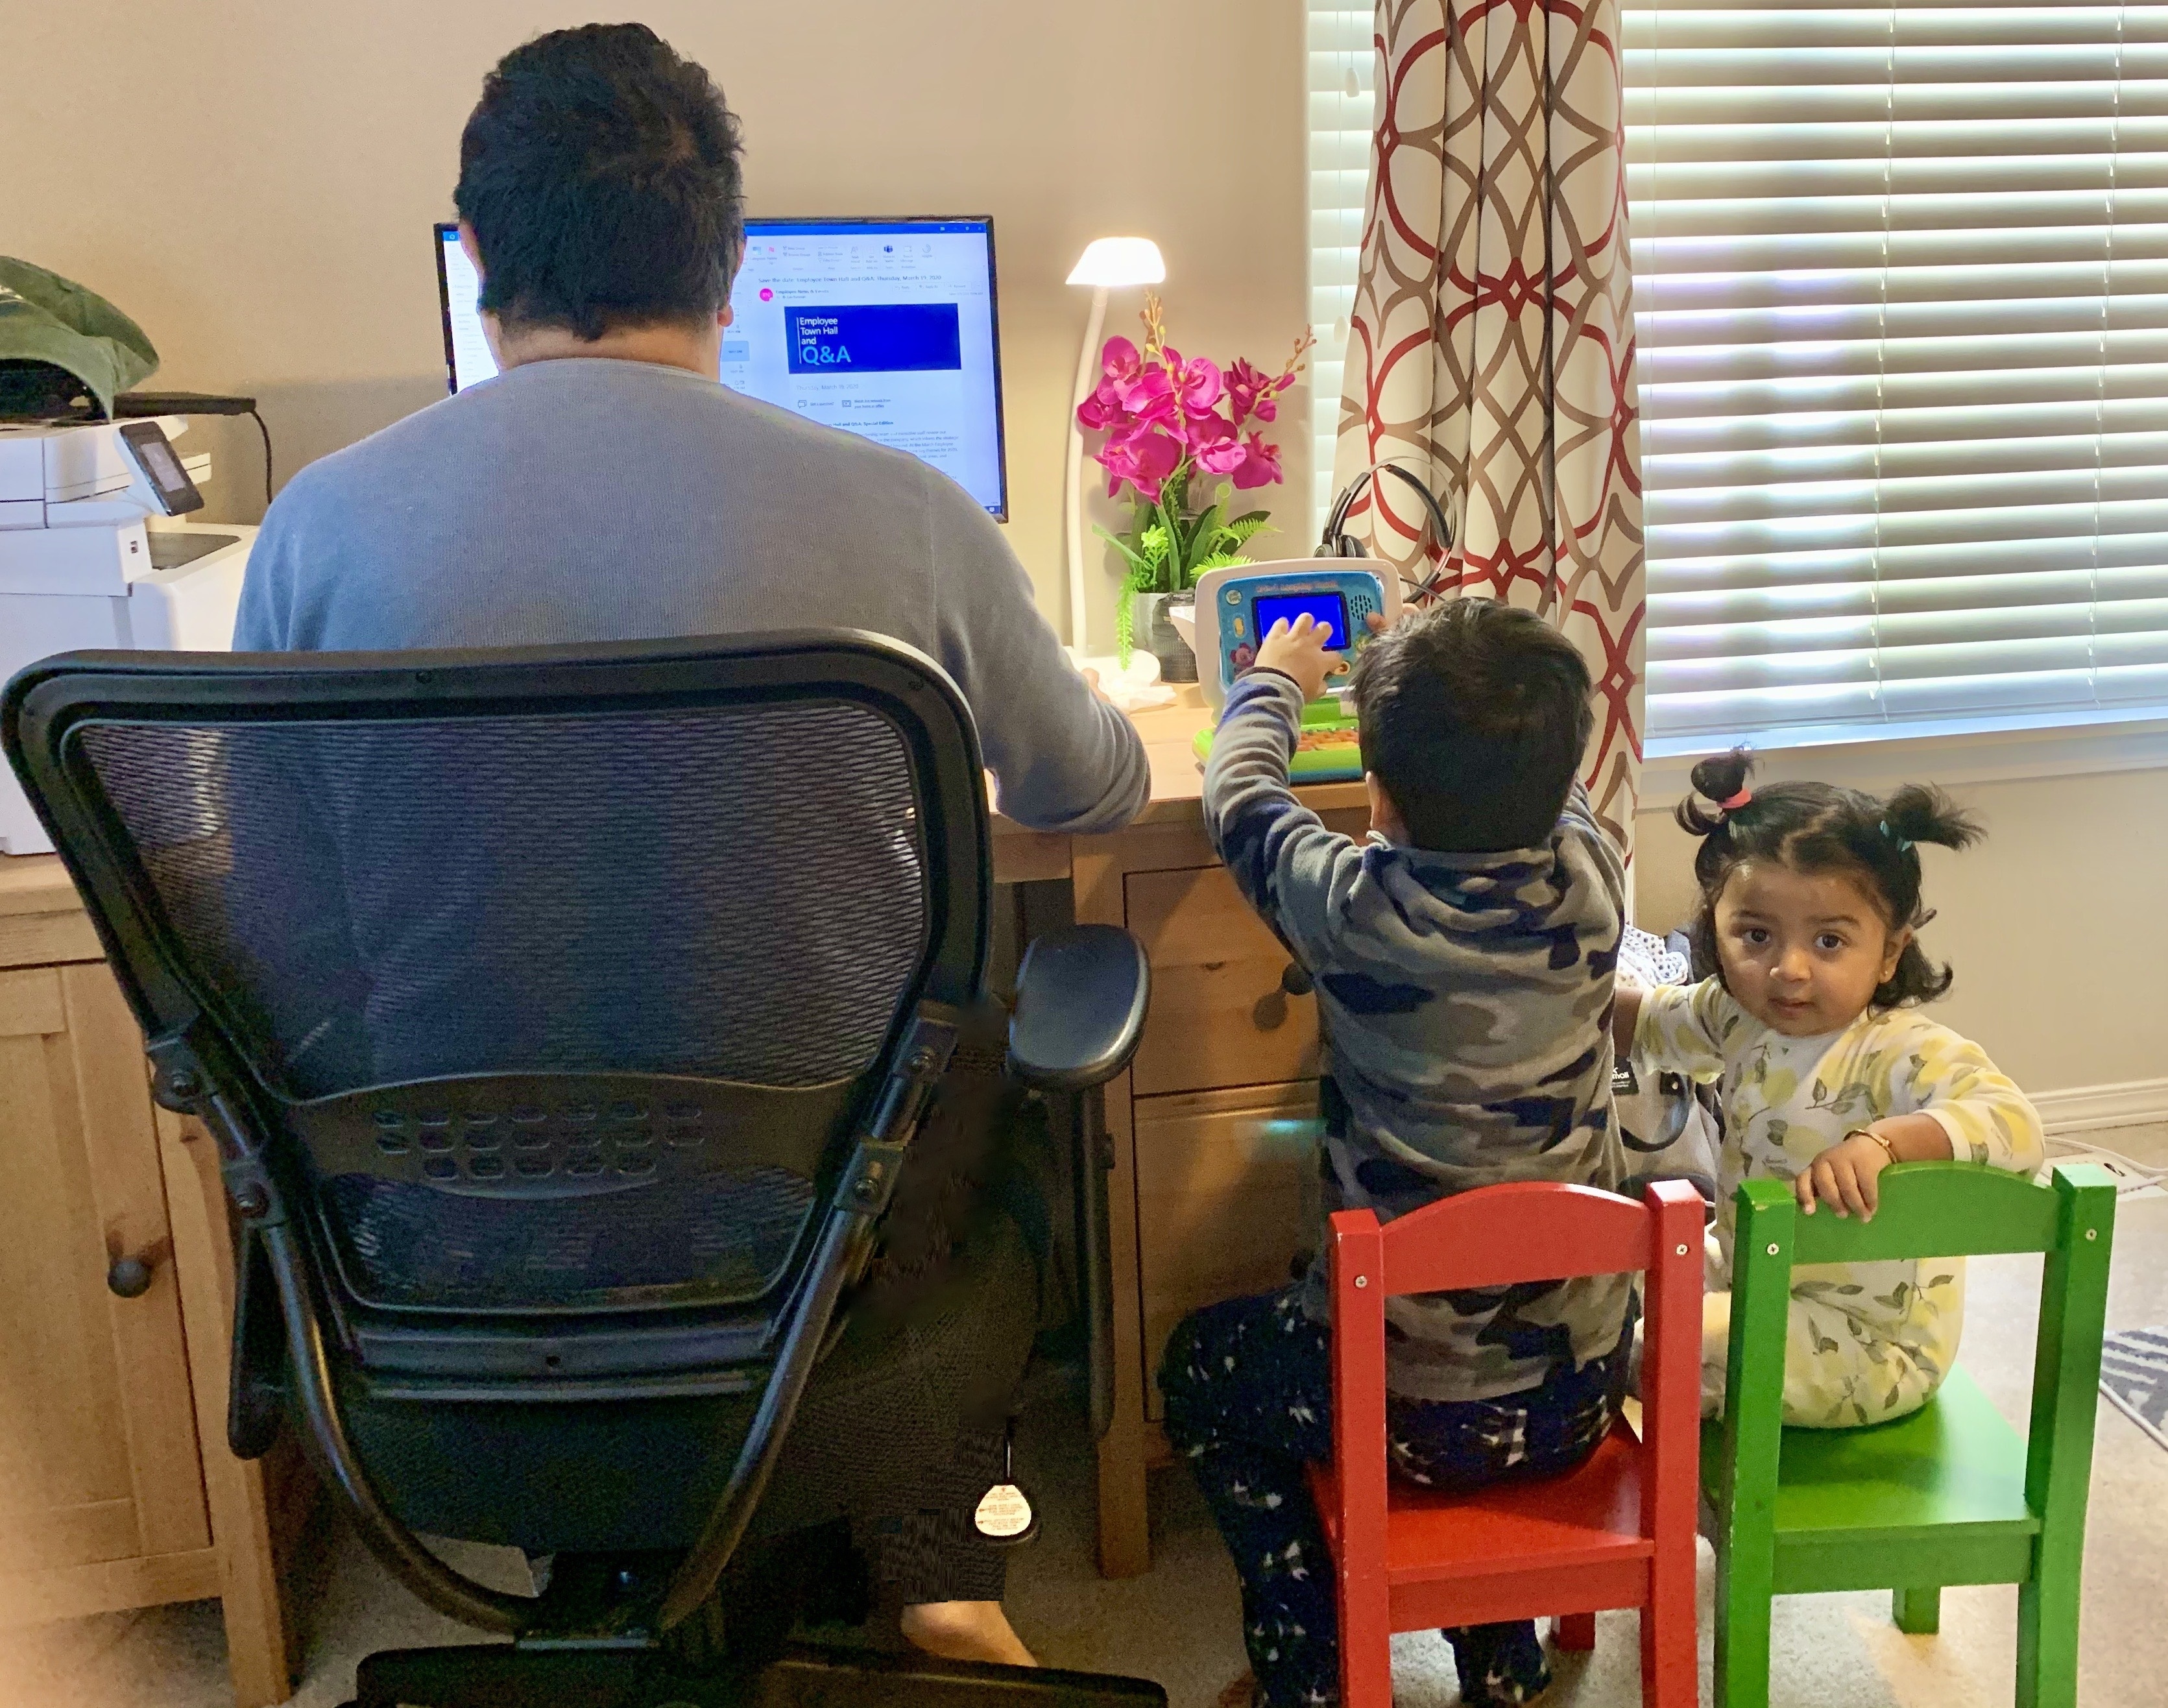 A Dad with his kids while working from home (Photo taken by the Mom)